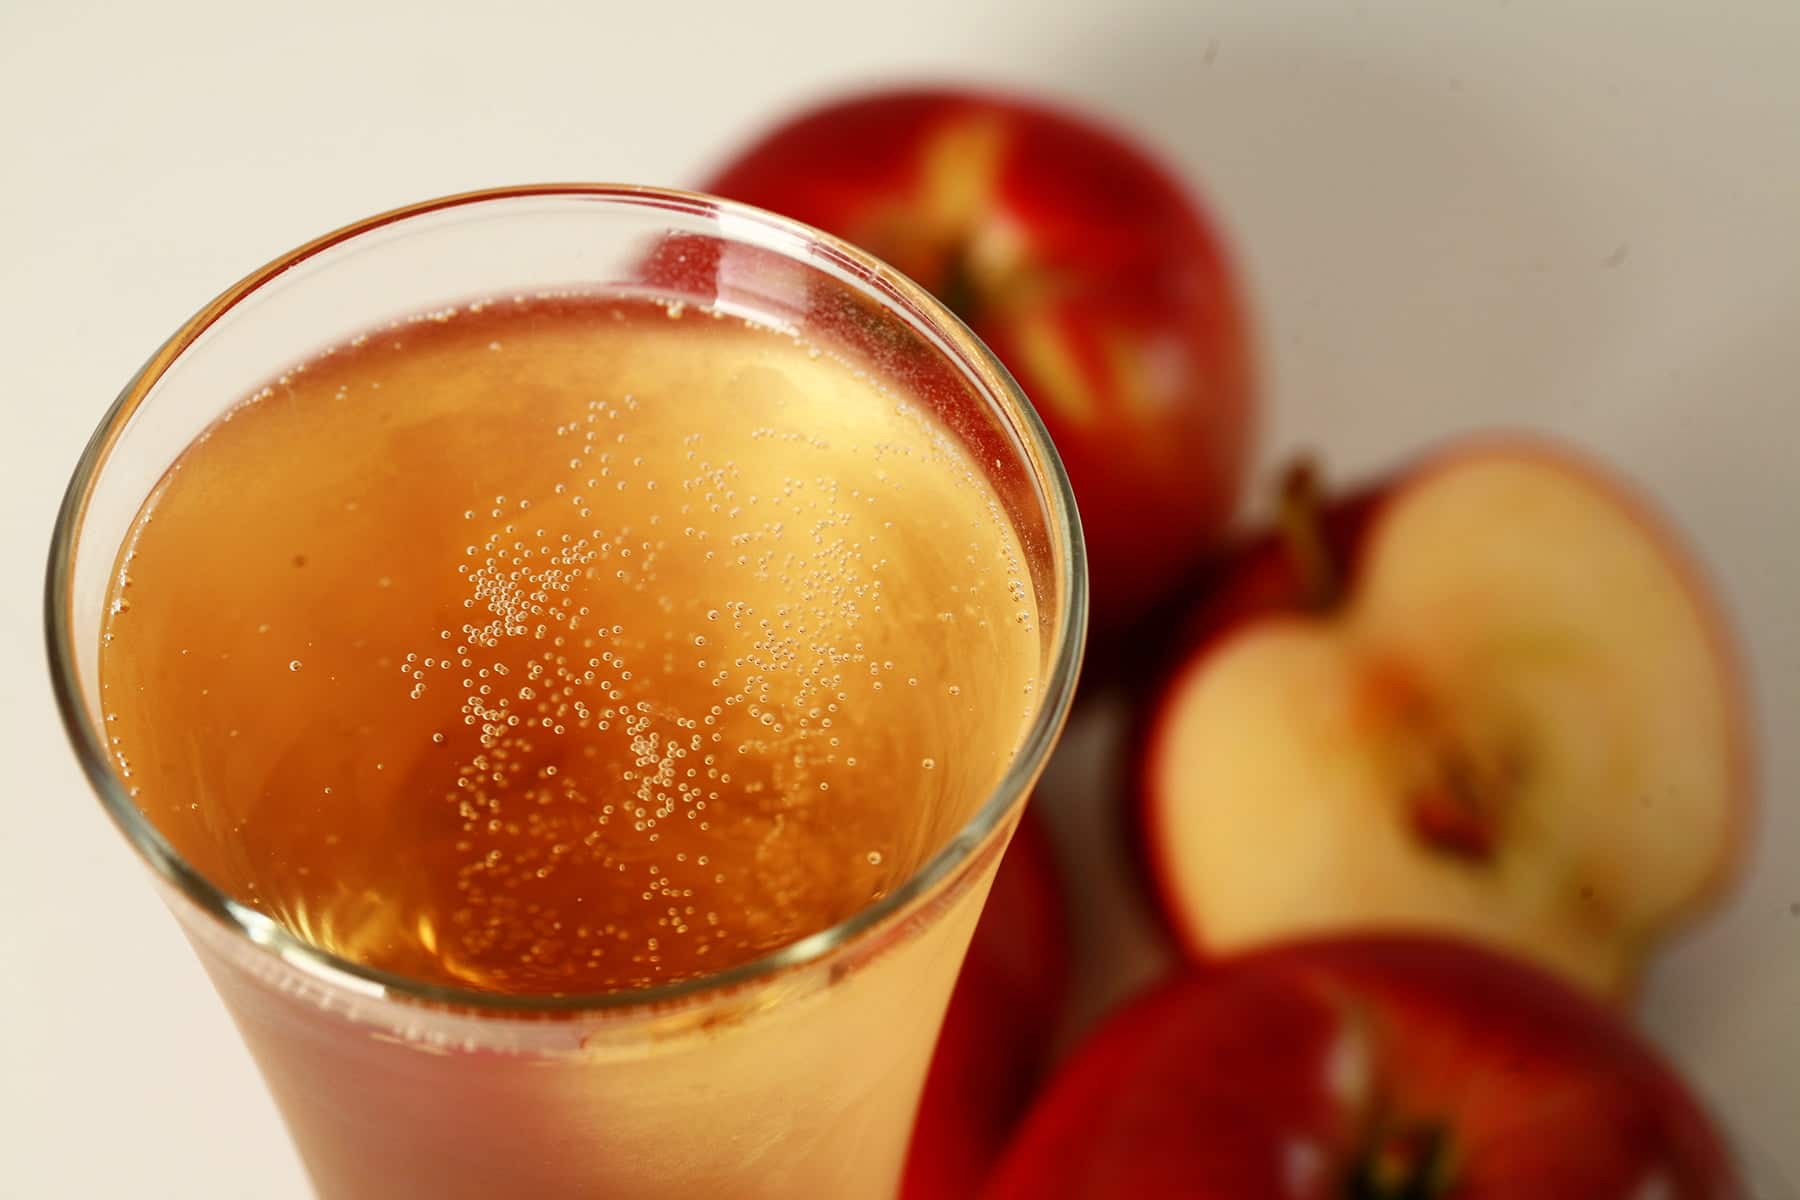 A glass of home brewed hard apple cider, made using this hard apple cider recipe.